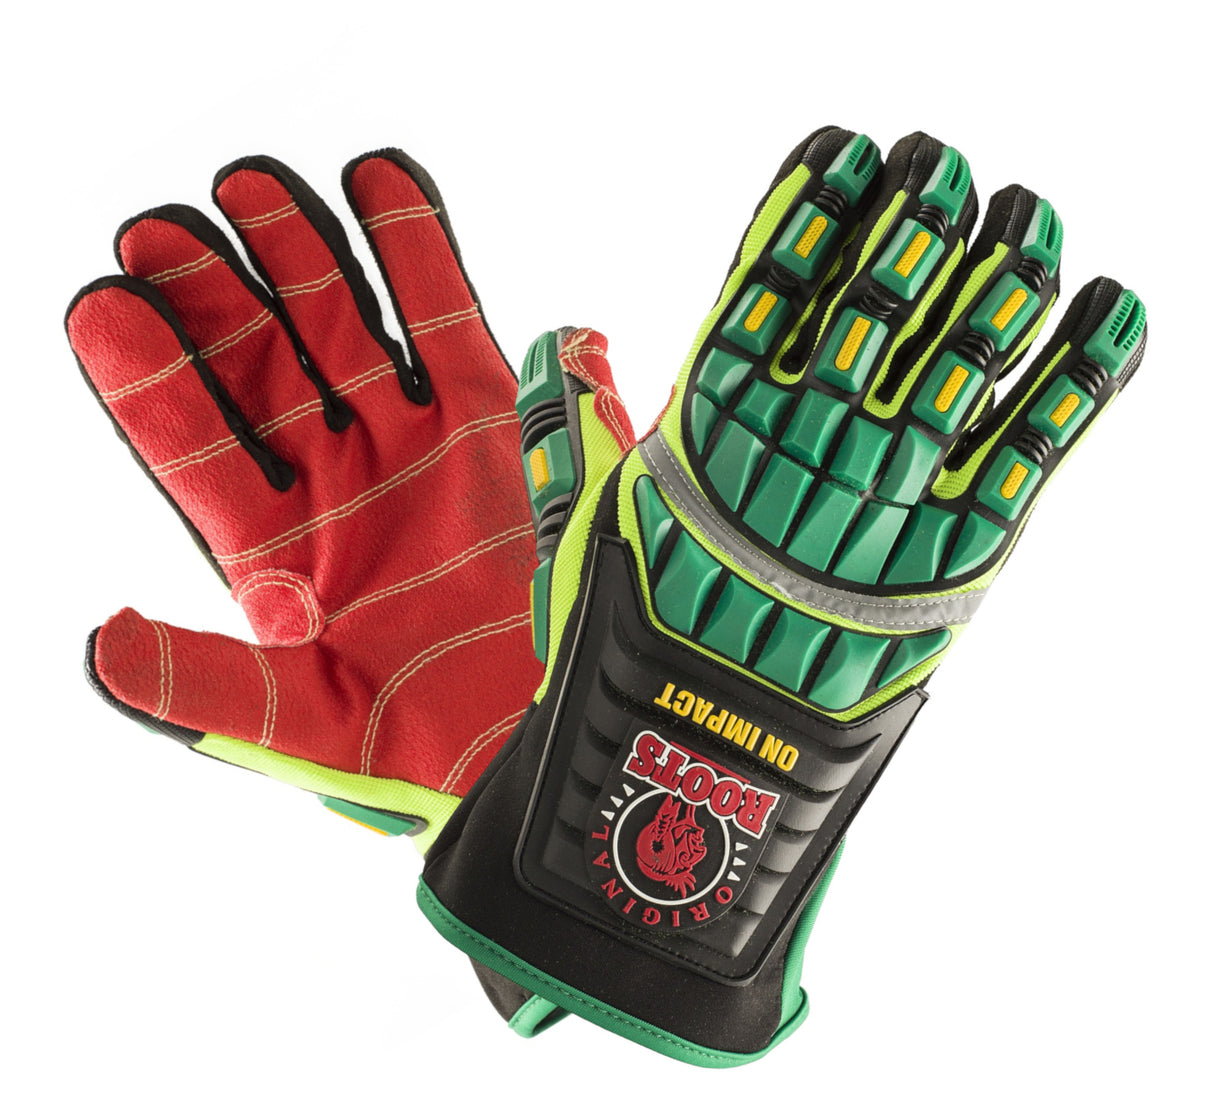 Roots RO50500 On Impact Rigger Gloves Keprotec Palm Size 2XL